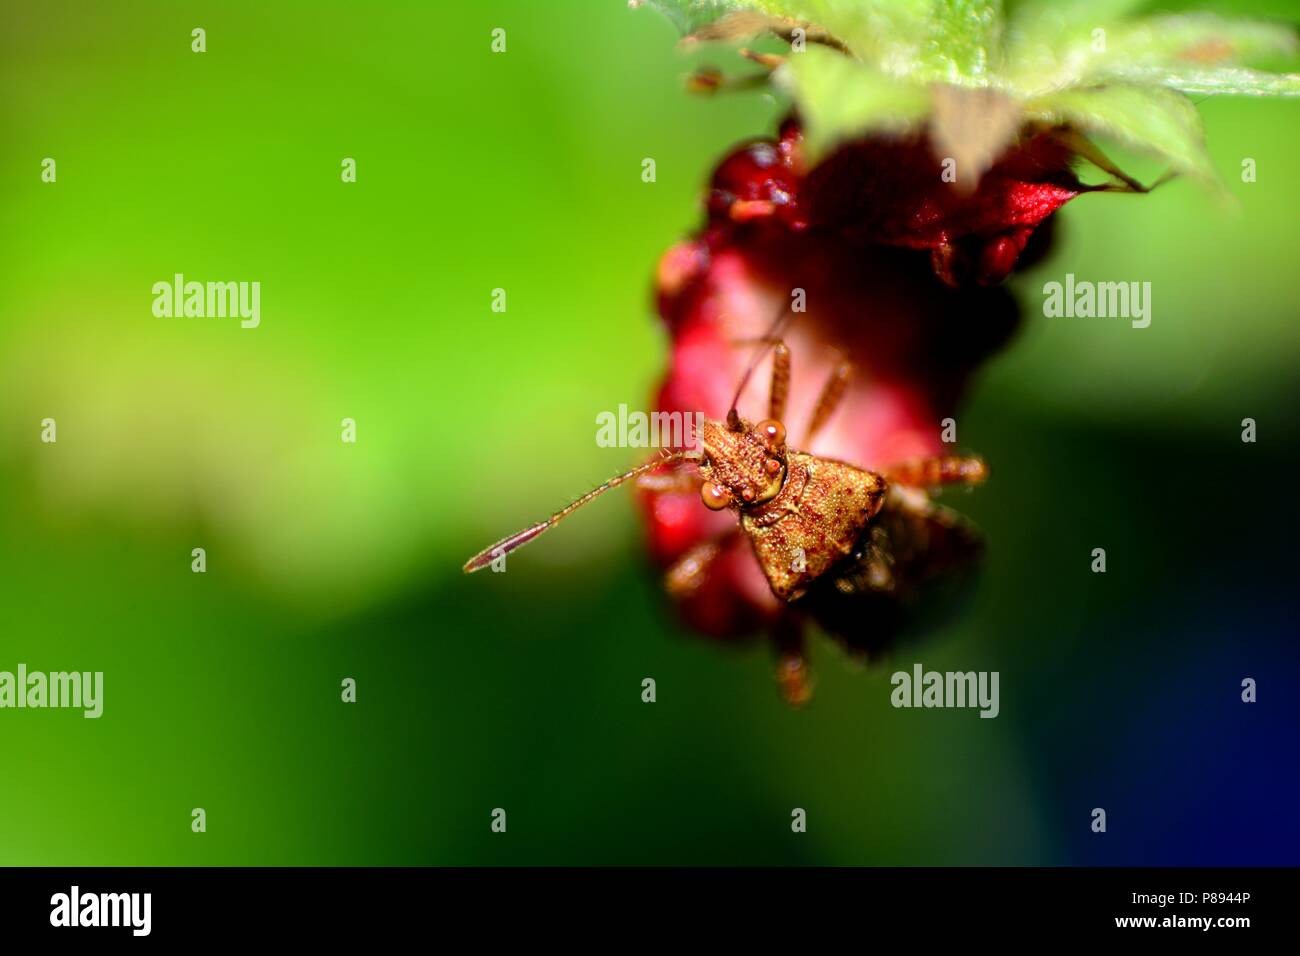 Large brown shield  bug on strawberry  in green  nature Stock Photo